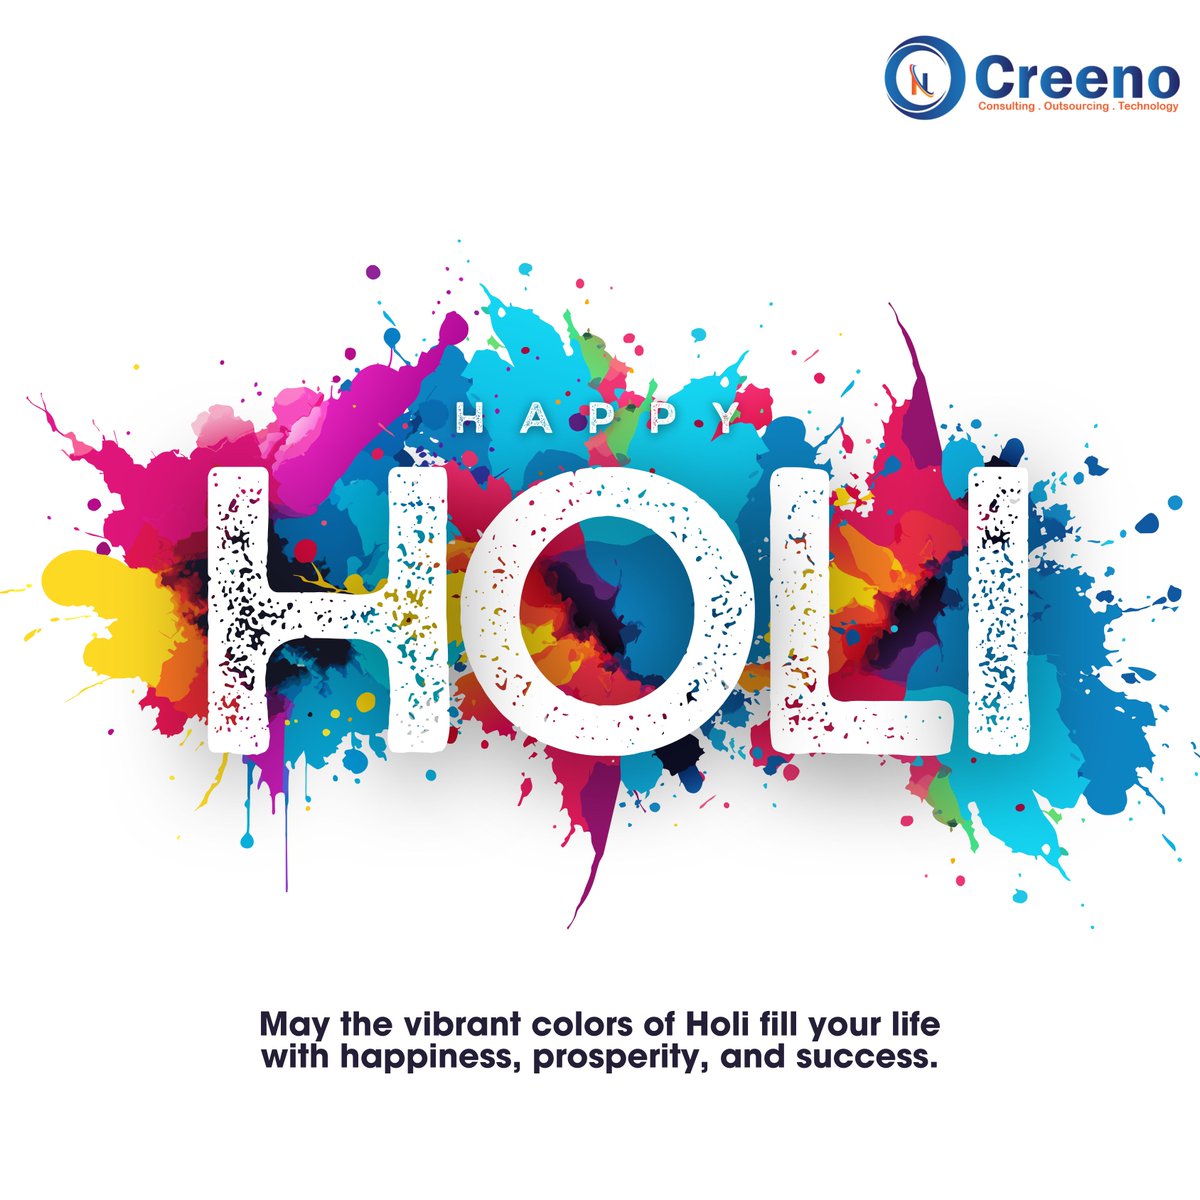 May the vibrant colors of Holi fill your life with happiness, prosperity, and success. #holi #happyholi